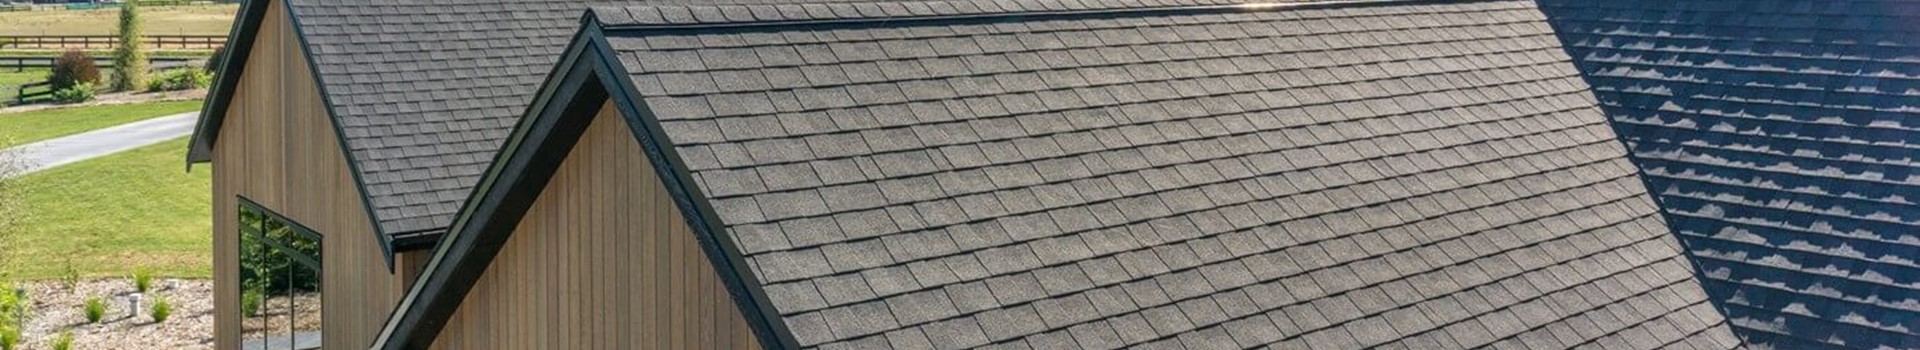 CertainTeed Asphalt Shingles withstand extra high winds